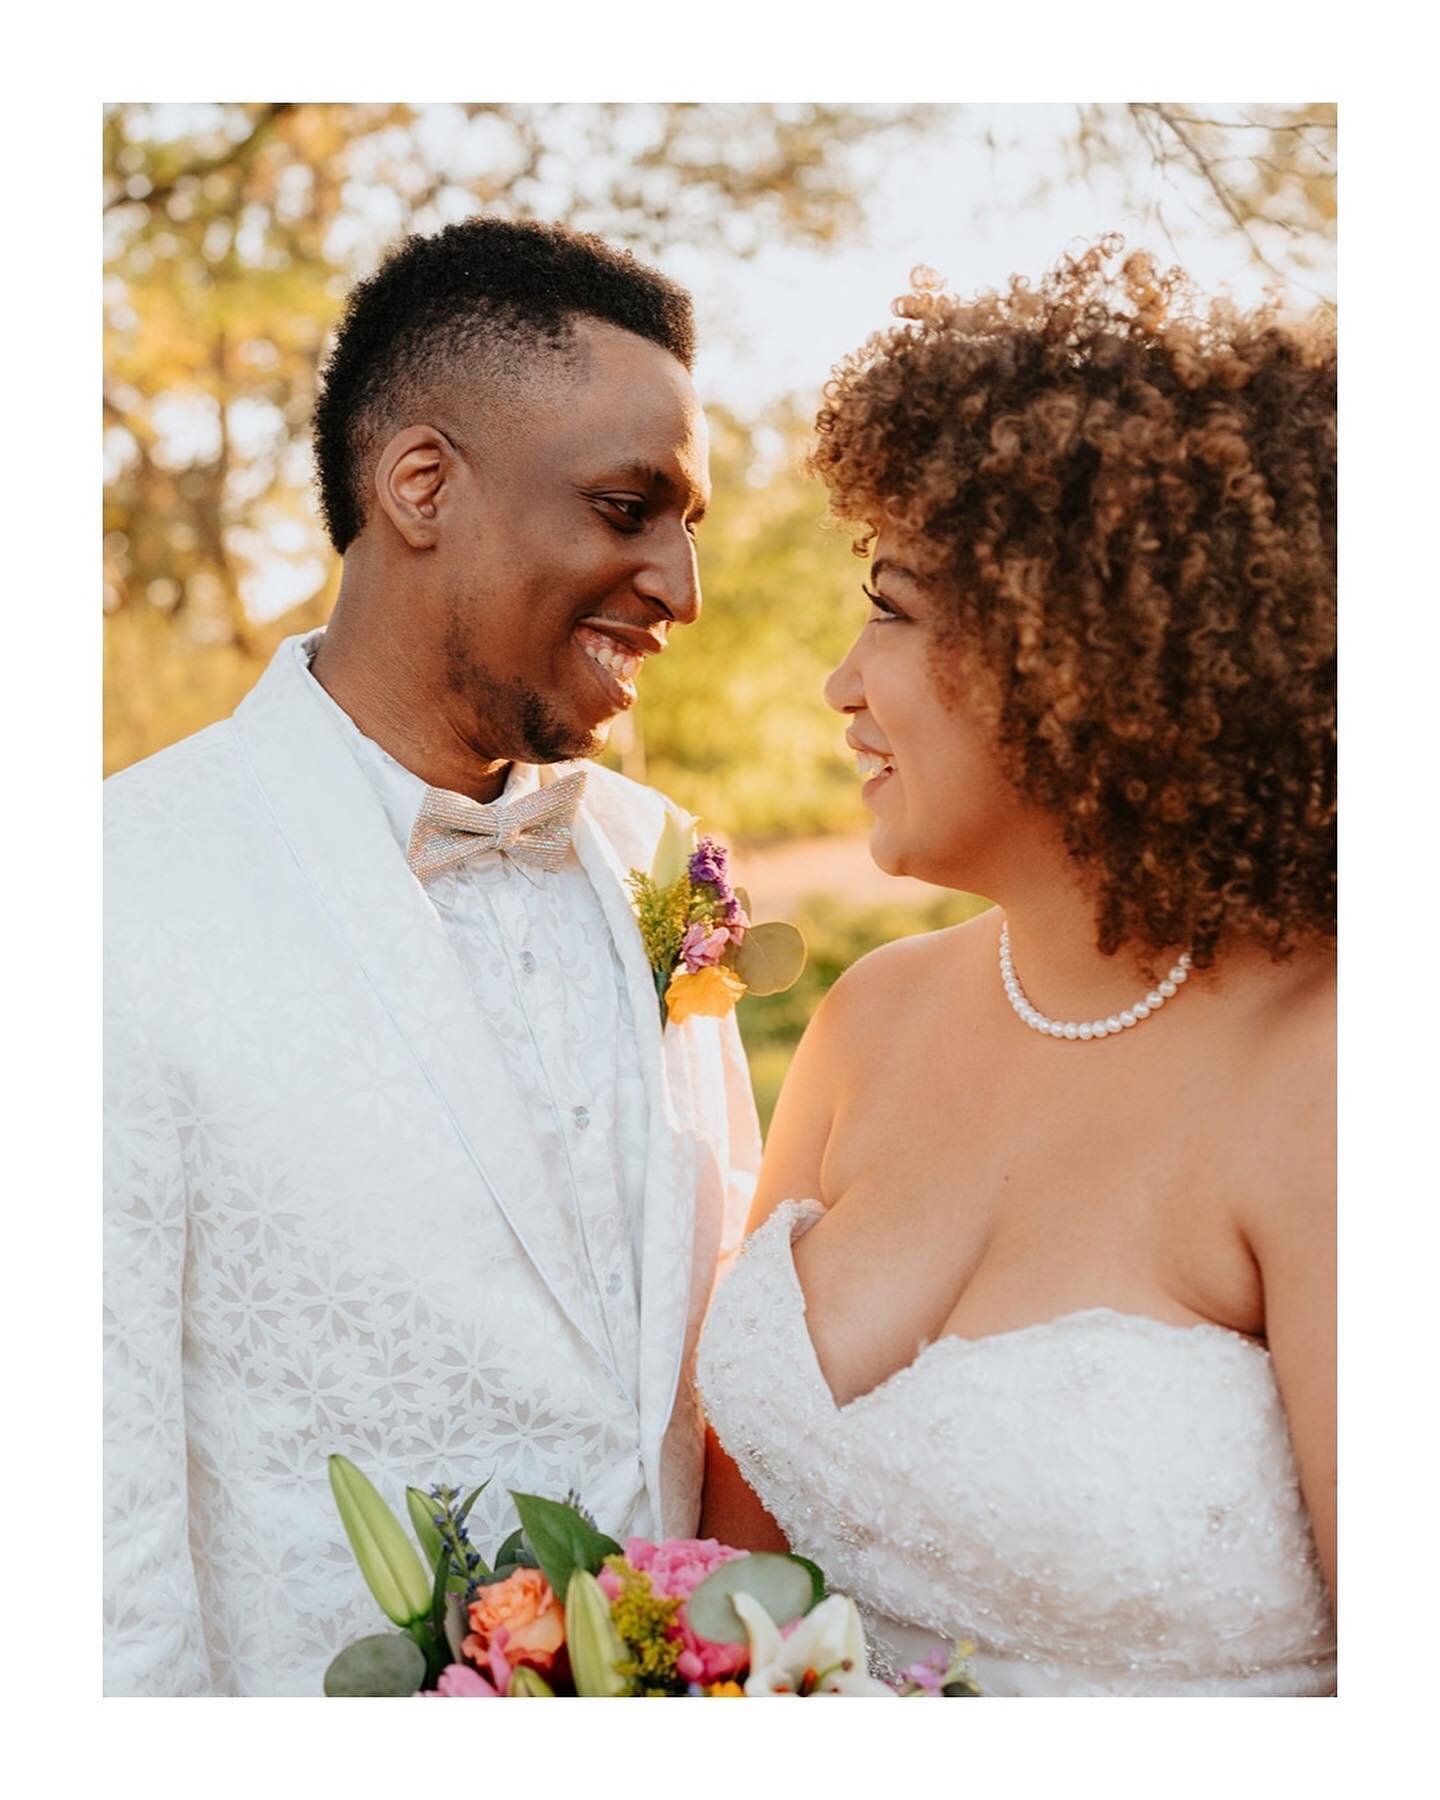 Amanda + Aderius 🌼 Their celebration couldn't be stopped, even by a pandemic. So happy this beautiful day finally happened. ⁠How has it already been more than a year?⁠
⁠
⁠
#austinweddingphotographer #equallywed #texasweddingphotographer #theantibrid